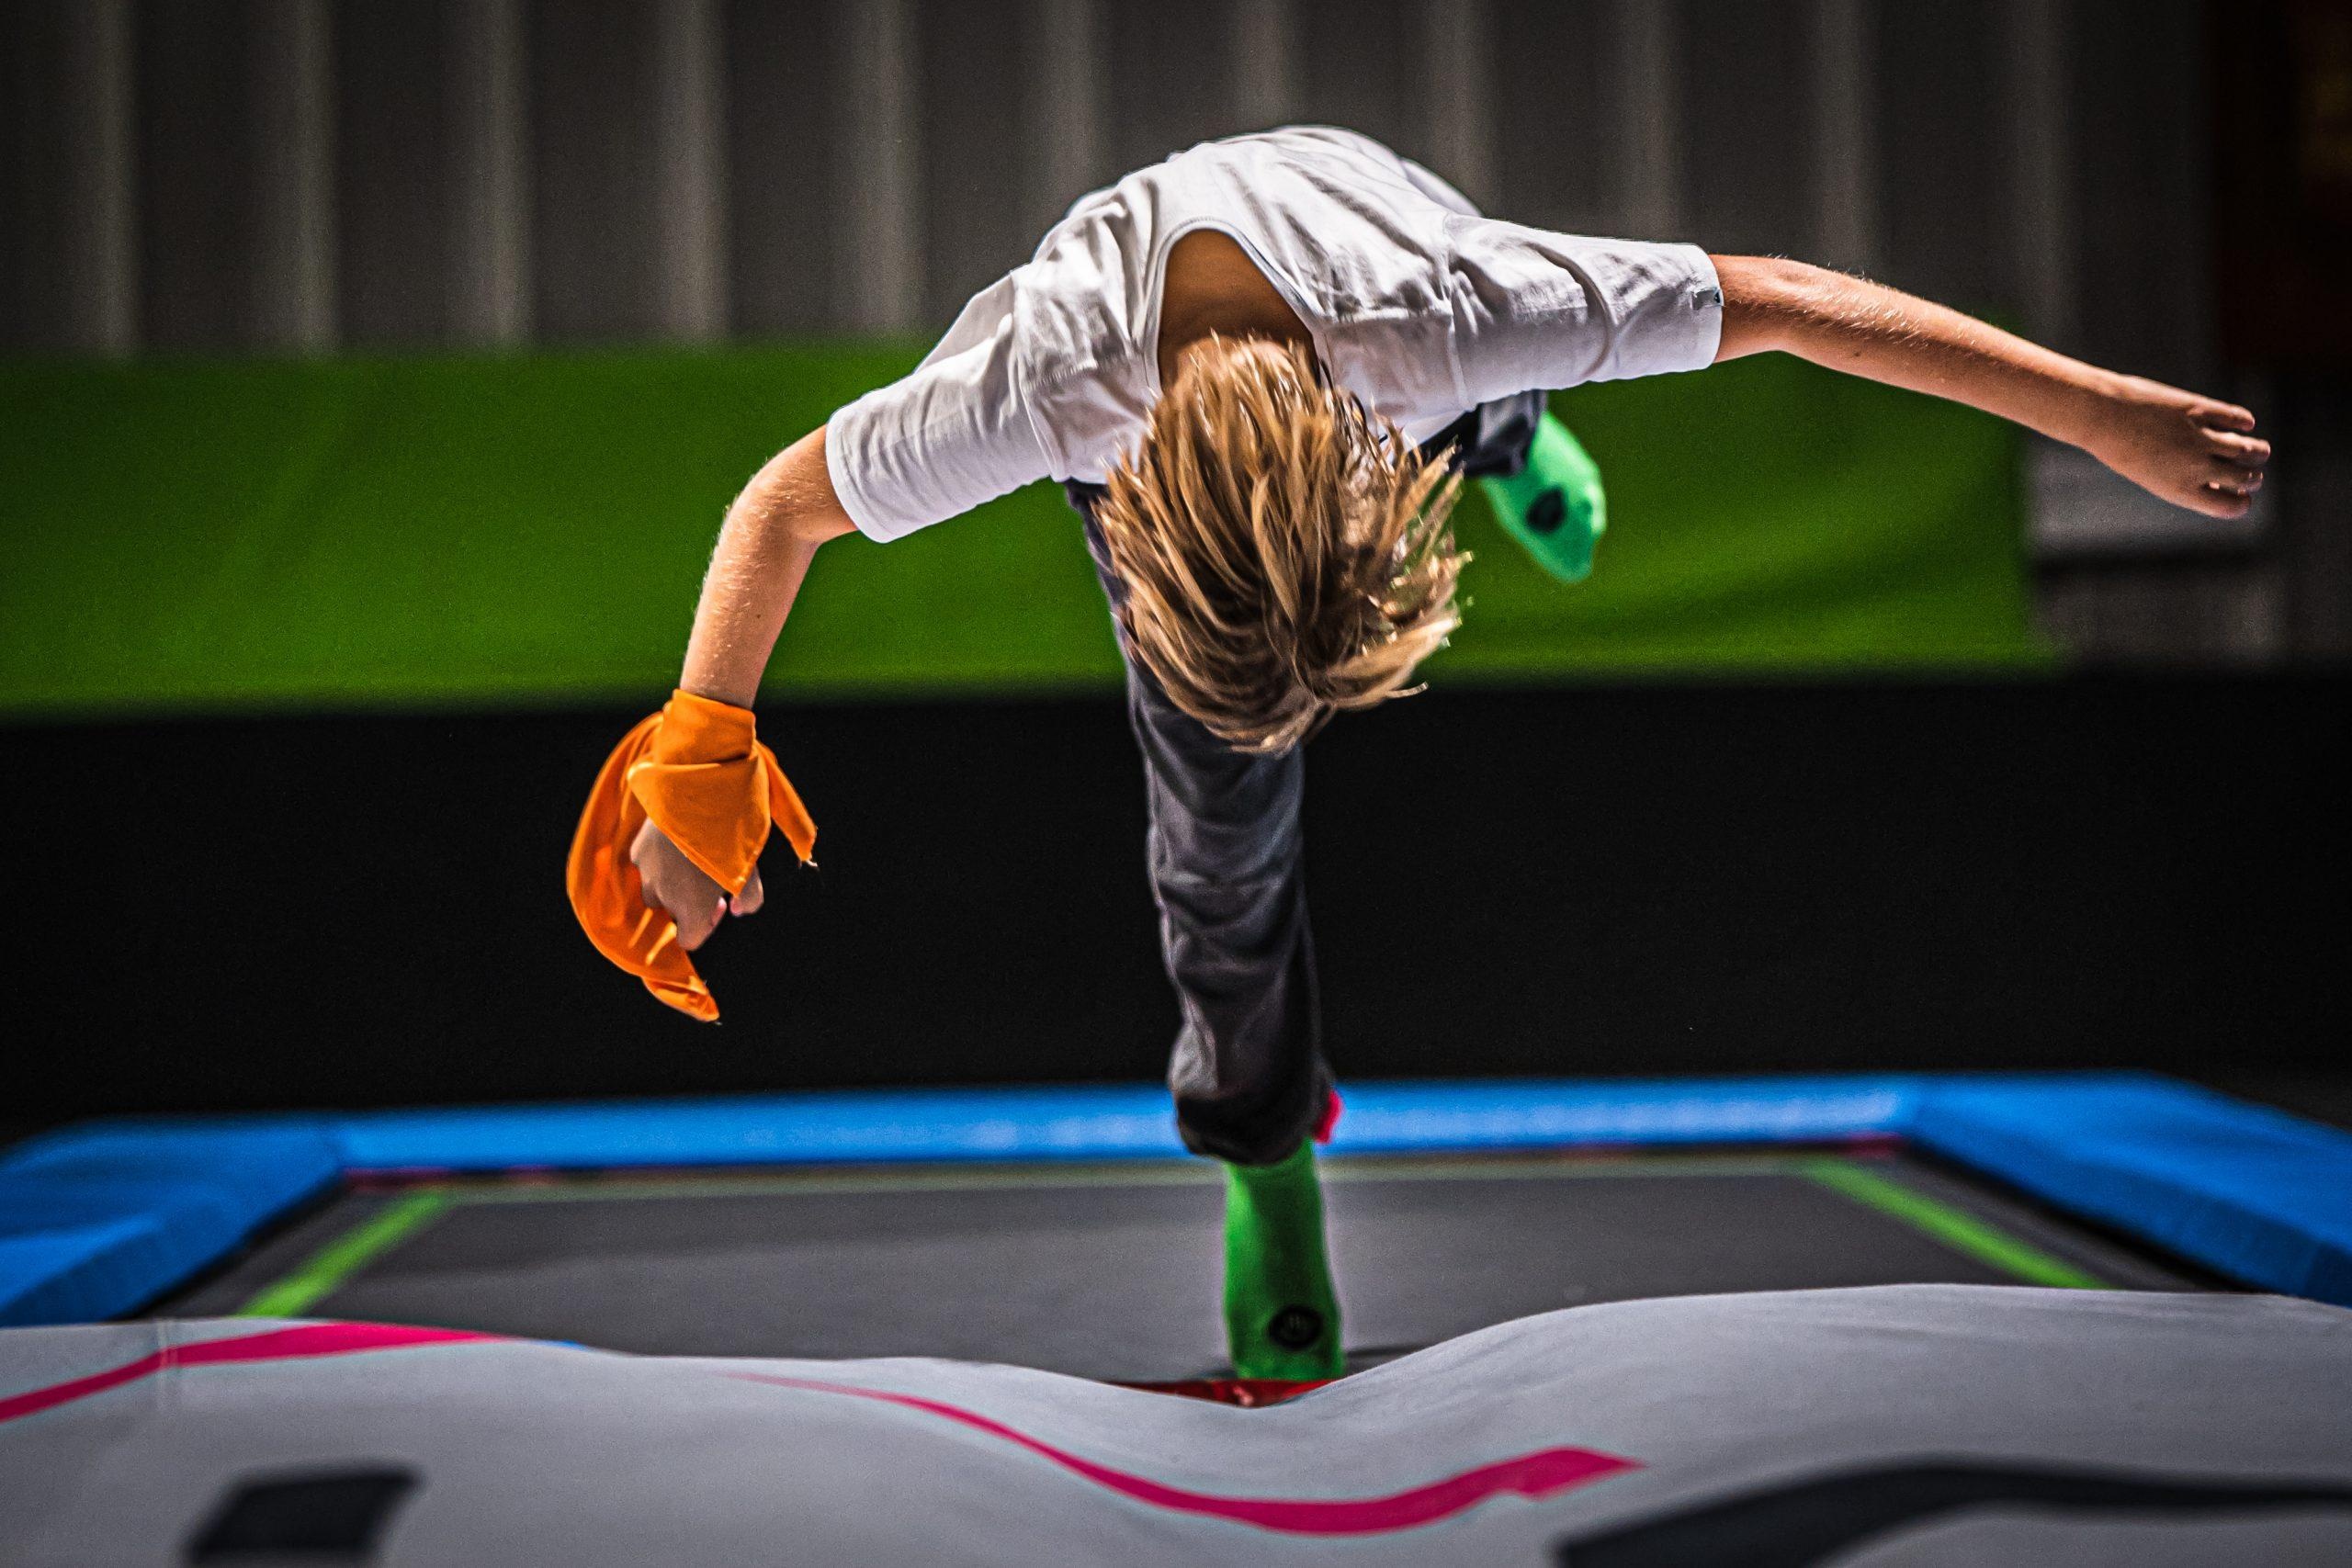 Trampolining: A trampoline gymnastics, A recreational activity, an acrobatic training tool as well as a competitive Olympic sport. 2560x1710 HD Wallpaper.